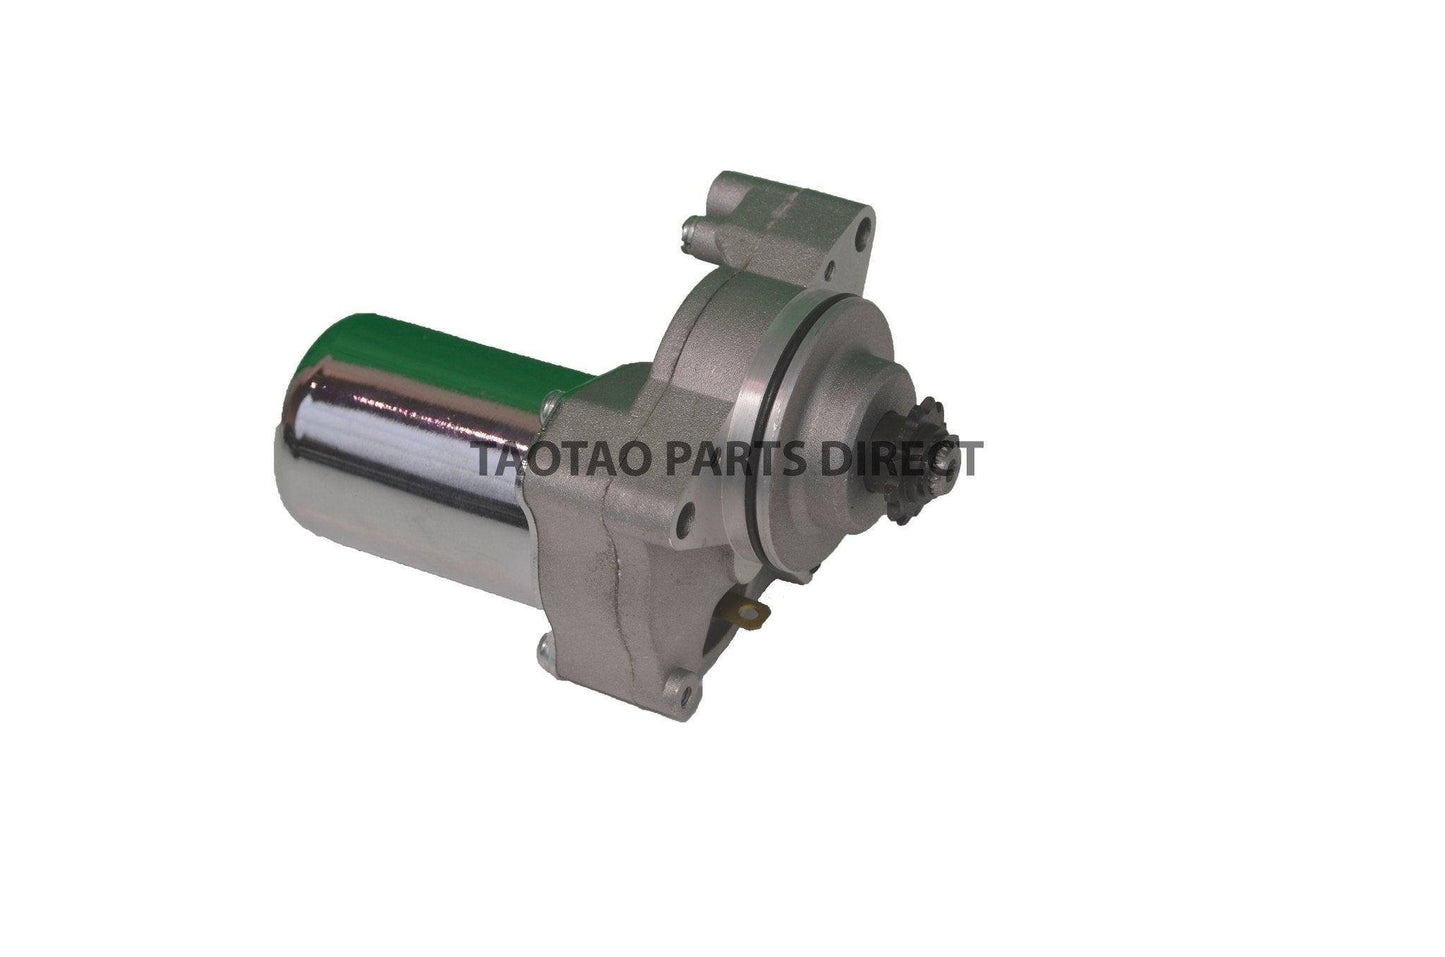 Starter For all 110cc and 125cc ATV's - TaoTao Parts Direct